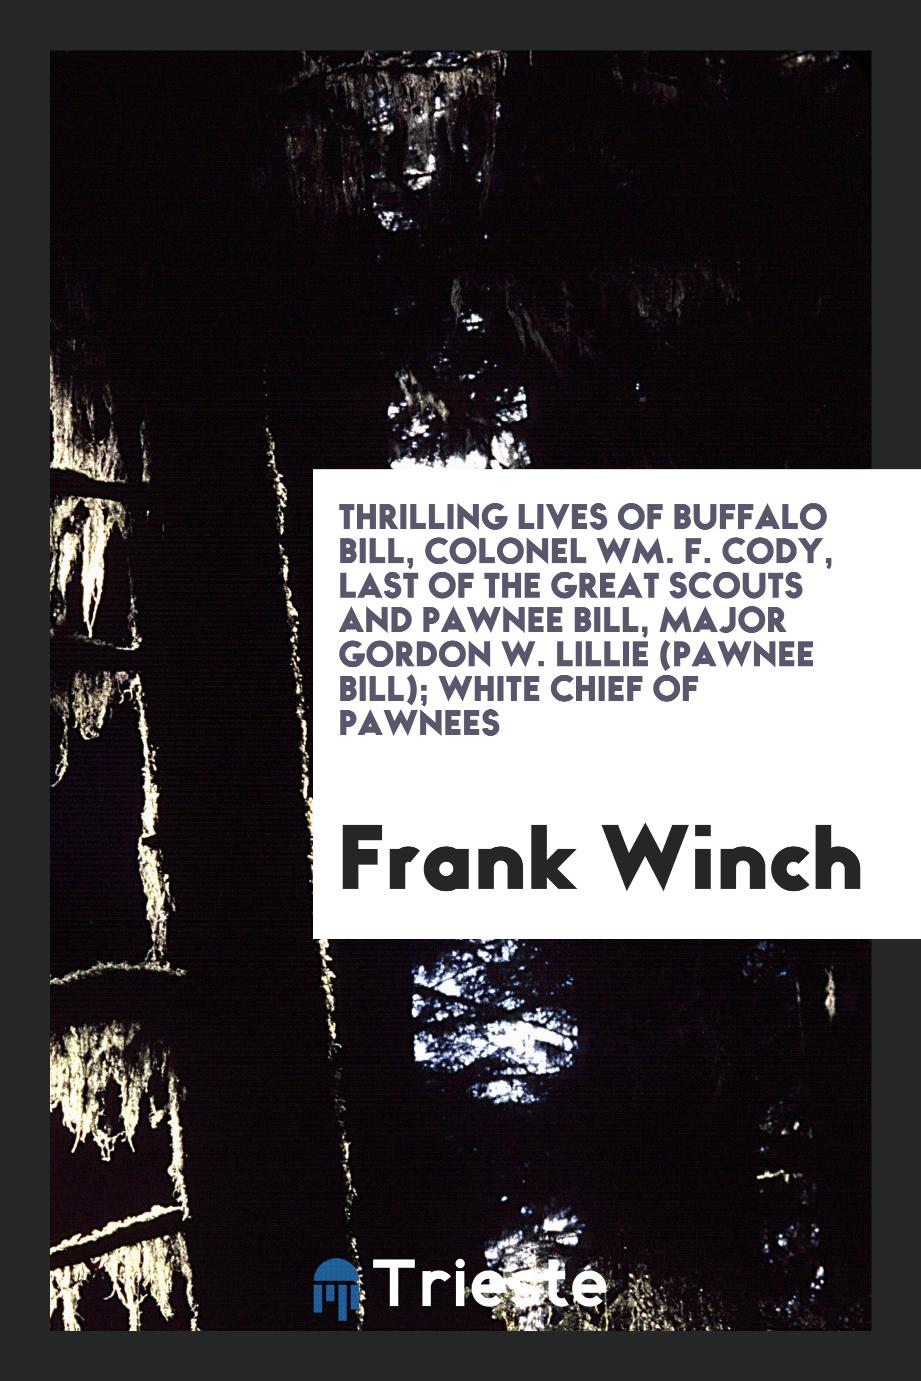 Thrilling lives of Buffalo Bill, Colonel Wm. F. Cody, last of the great scouts and Pawnee Bill, Major Gordon W. Lillie (Pawnee Bill); white chief of Pawnees